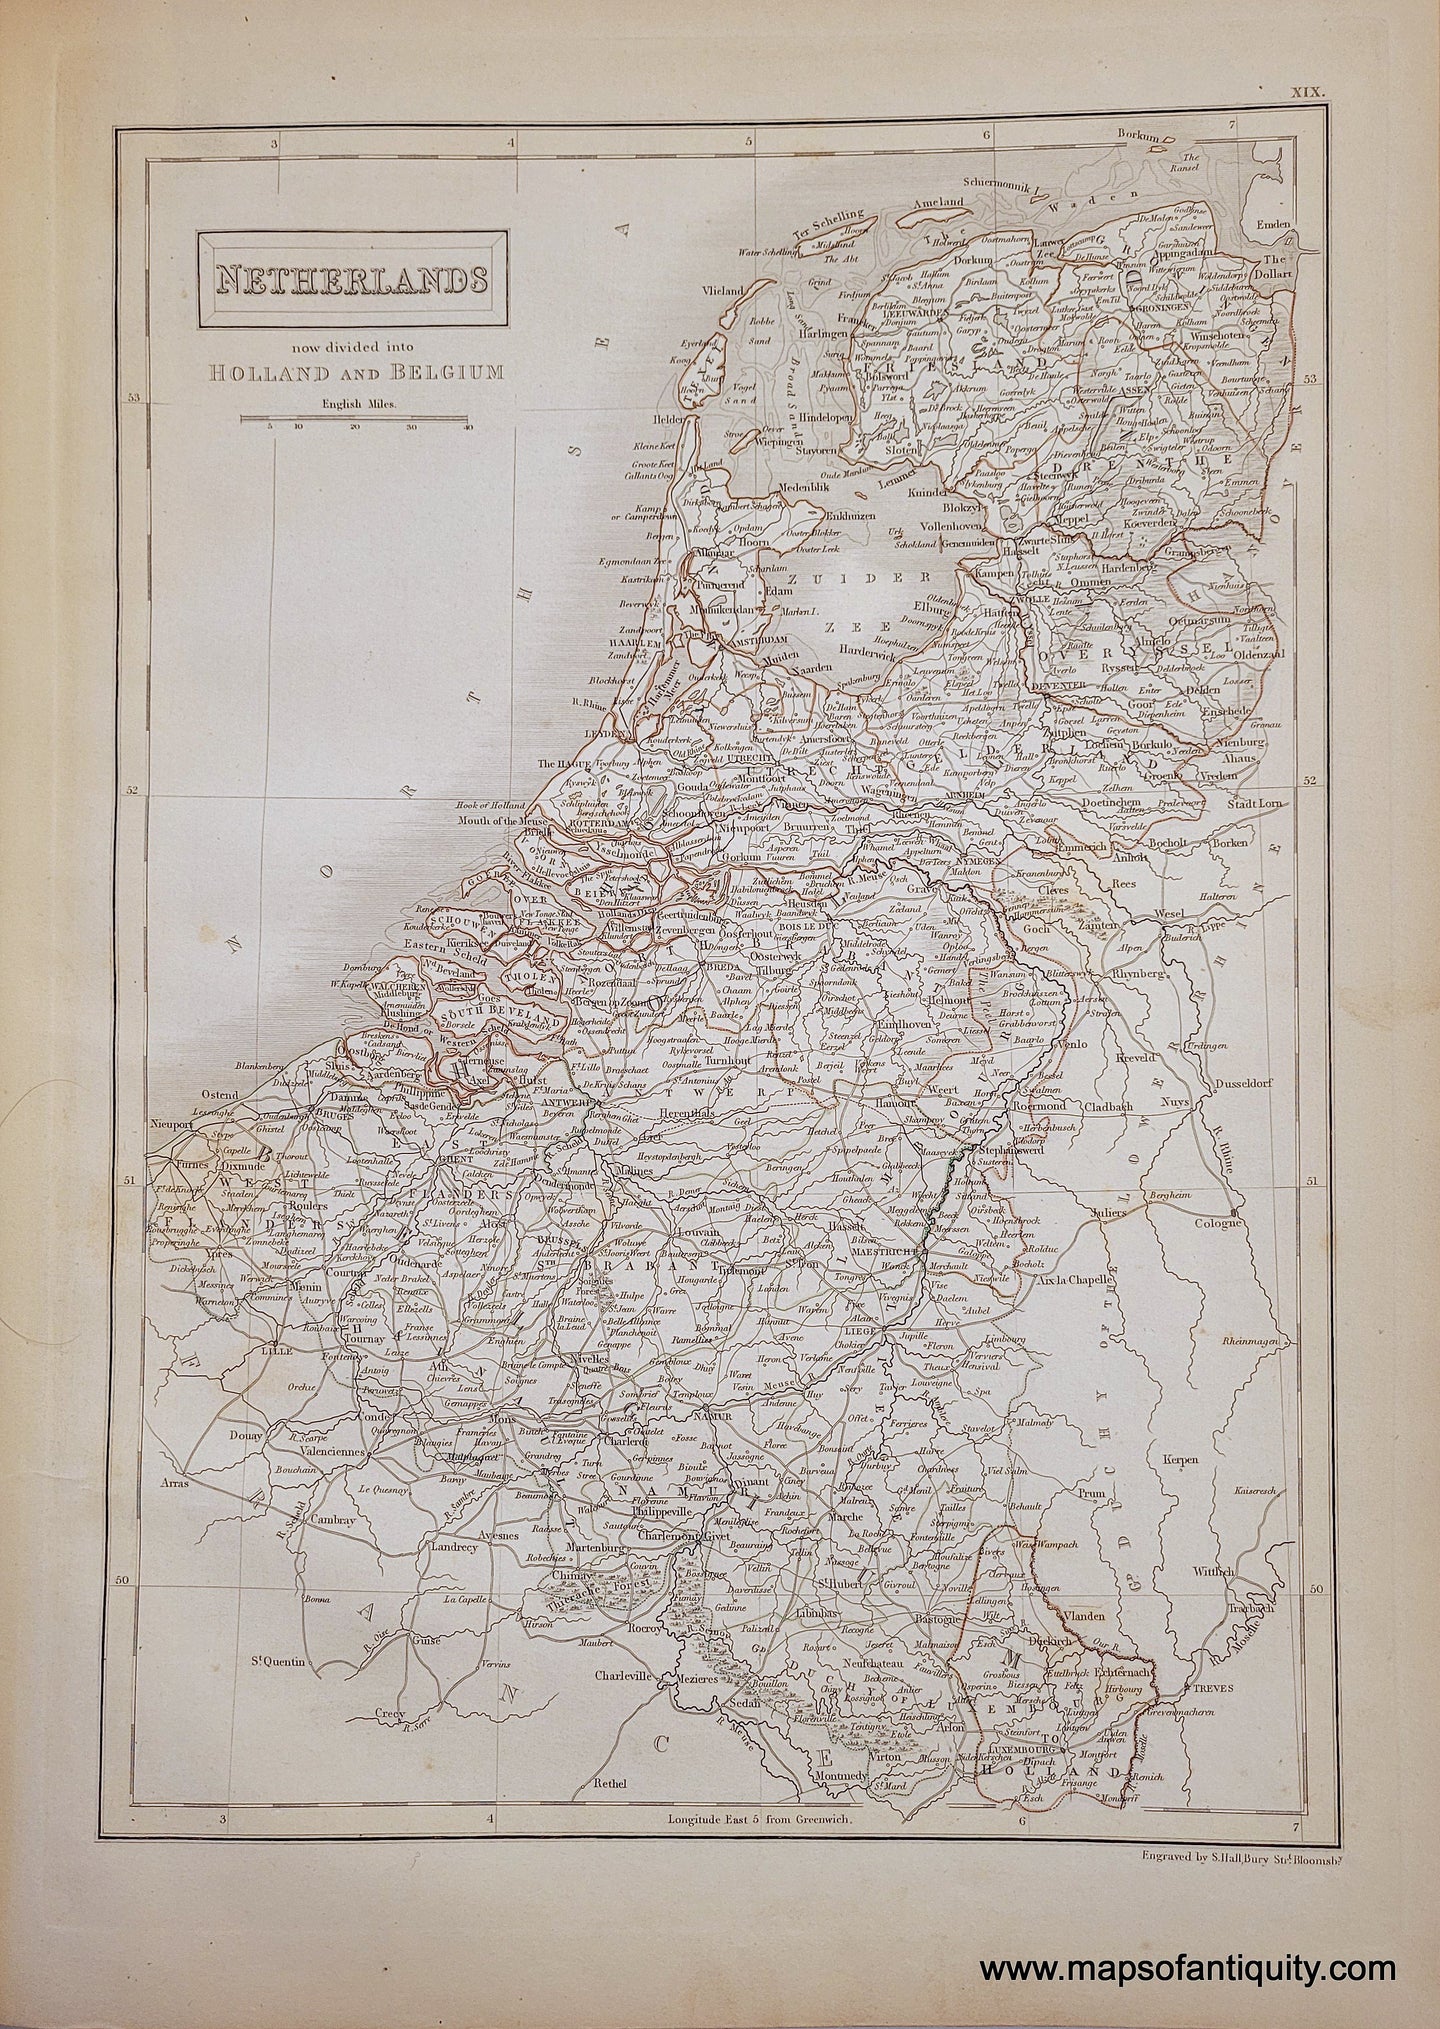 Genuine-Antique-Map-Netherlands-now-divided-into-Holland-and-Belgium-1841-Black-Maps-Of-Antiquity